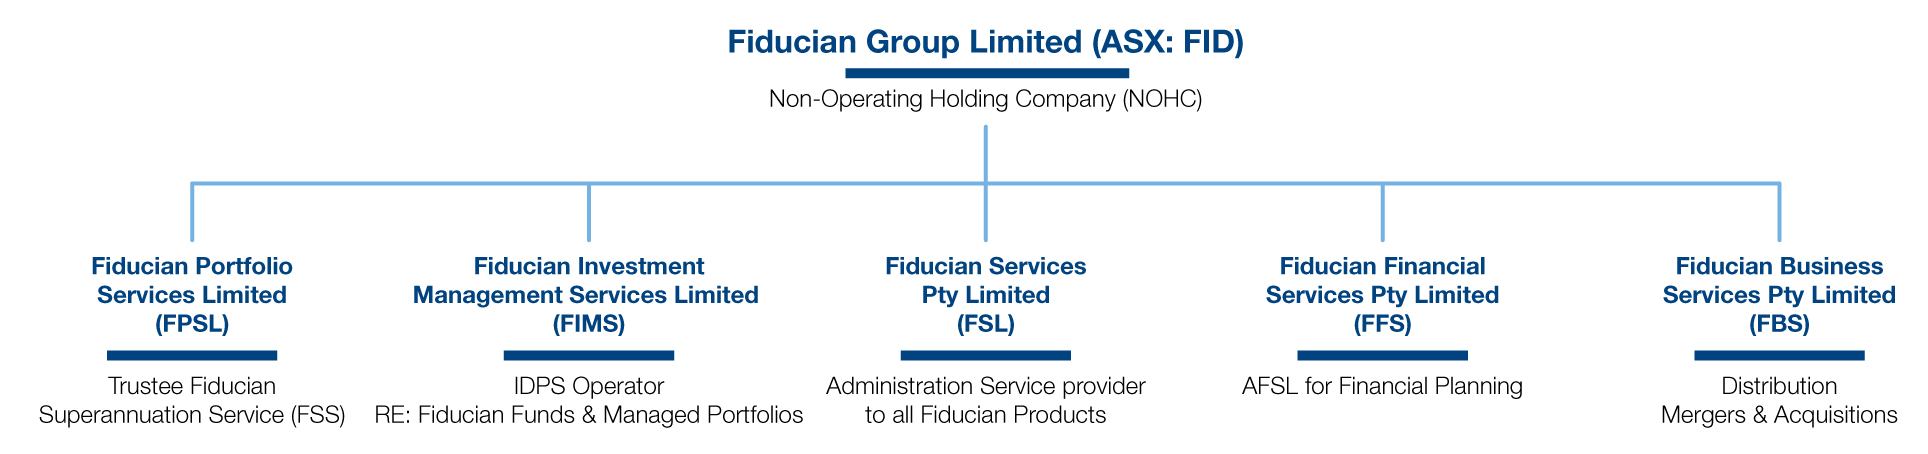 Our Business About Fiducian Financial Services